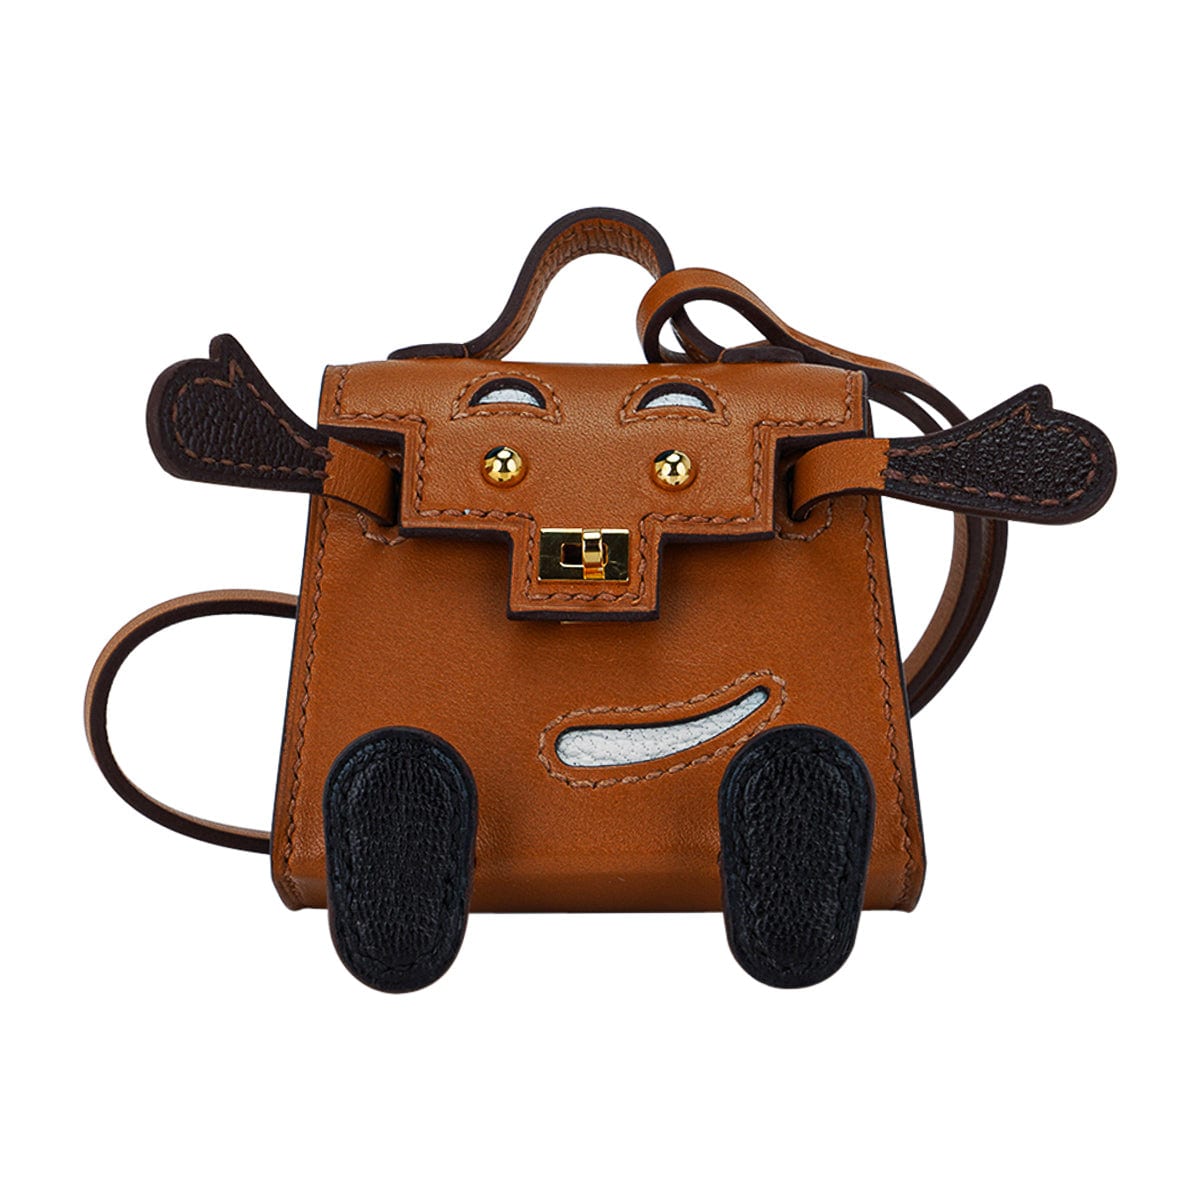 Hermes Limited Edition Quelle Idole Doll Bag Charm in Sable